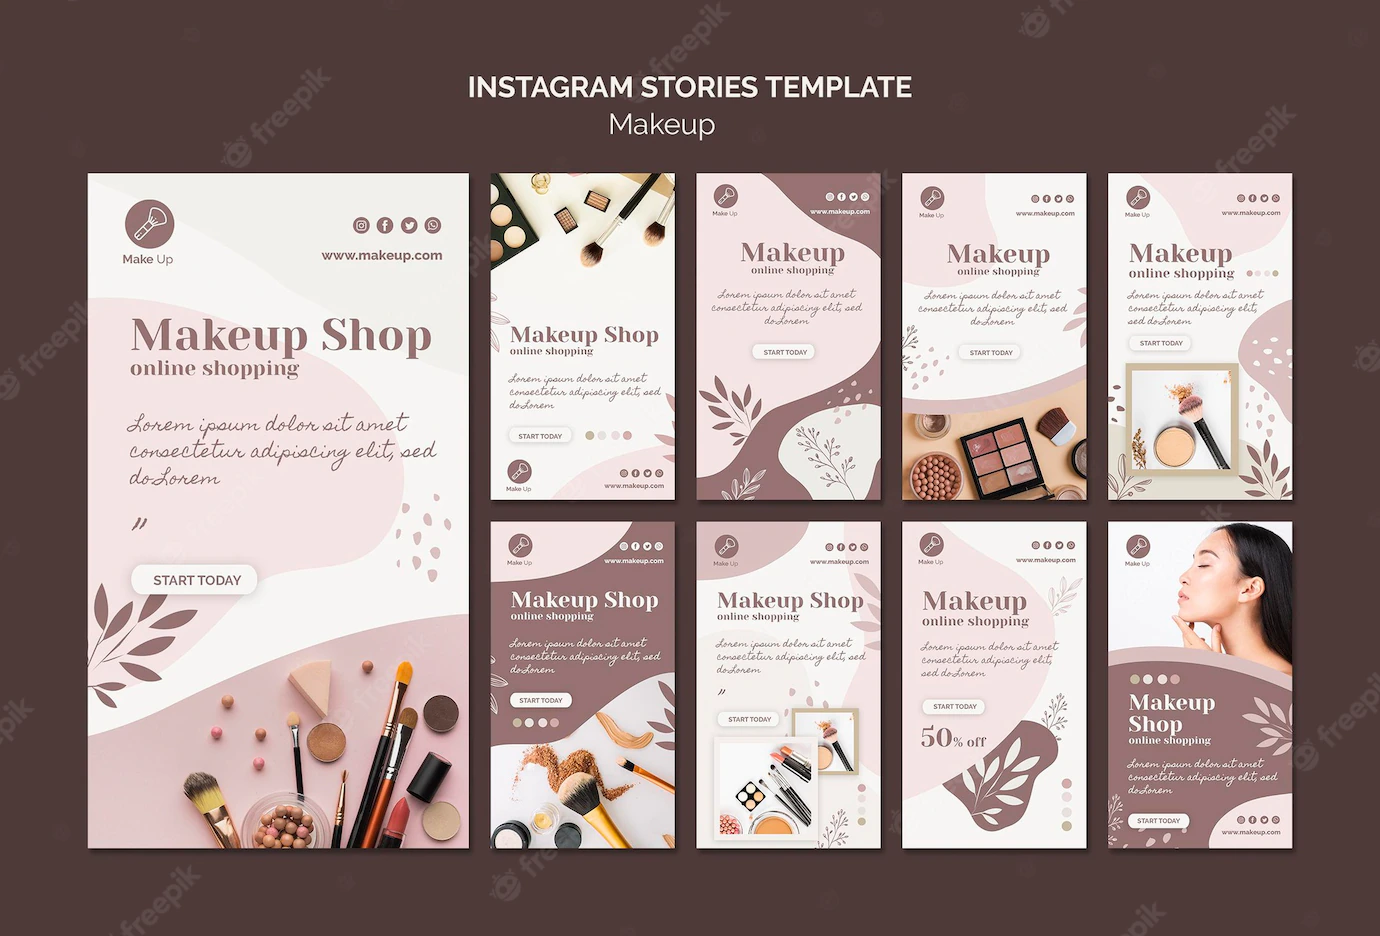 Make Up Concept Instagram Stories Template 23 2148615476